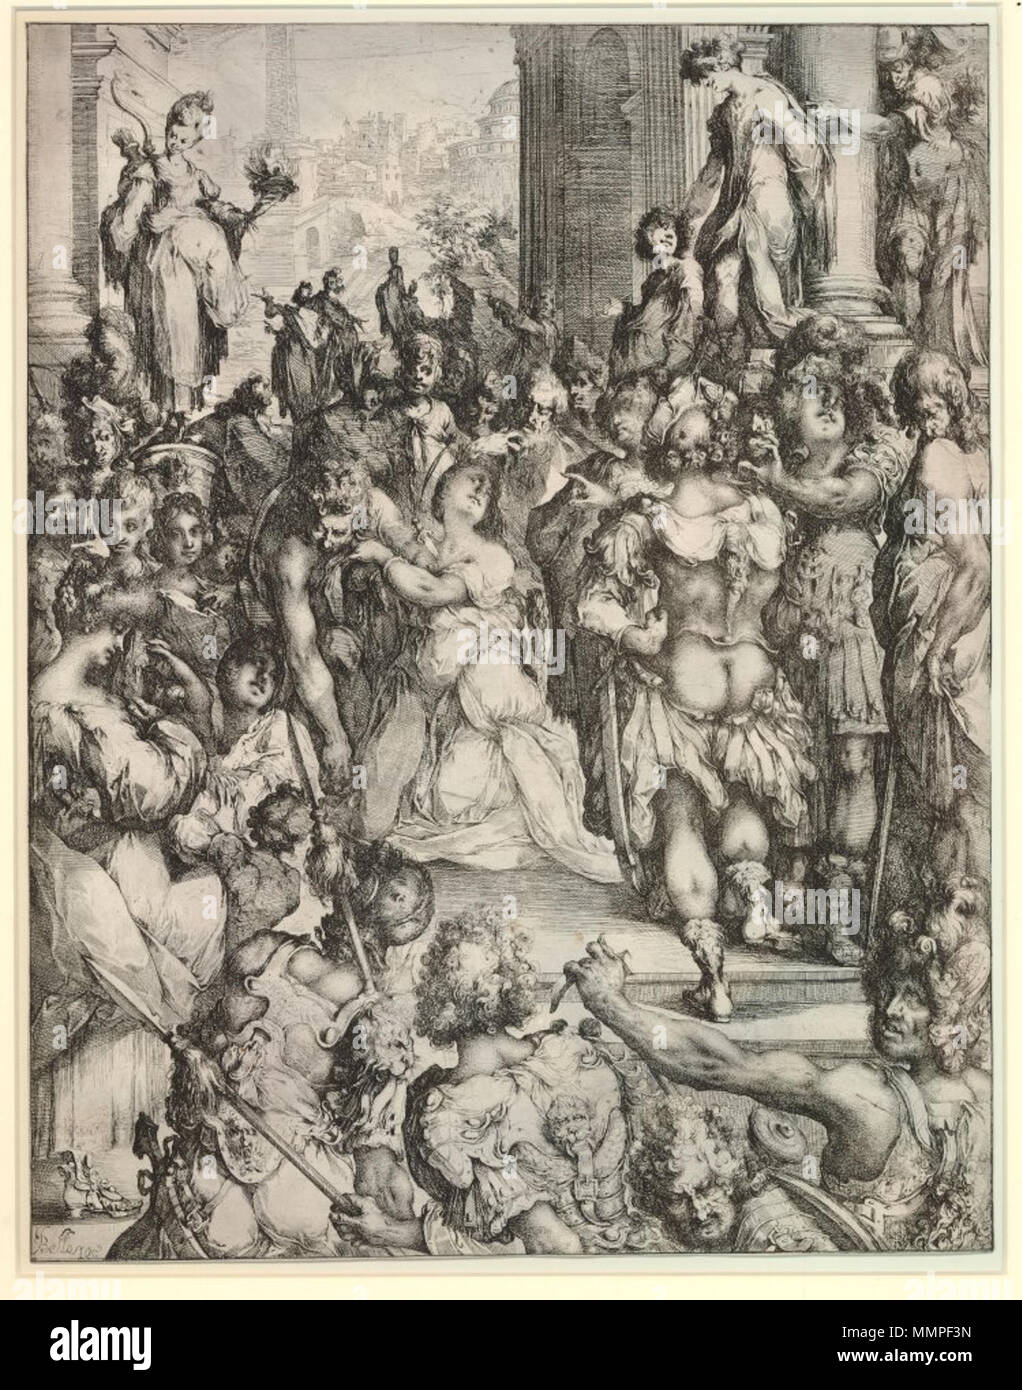 . English: The martyrdom of St Lucy, stabbed with a dagger; around her, people and soldiers, and a statue of Diana holding an oil-lamp; antique buildings, obelisk and fortified city in the background. 1613/6 Etching with stipple Inscriptions Inscription Content: Signed on plate. Dimensions Height: 447 millimetres (trimmed) Width: 347 millimetres (trimmed)  . 1610s.   Jacques Bellange  (1575–1616)     Alternative names Jacques de Bellange; Jacques Charles de Bellange; Jacques. Bellange; Jacques Belange; Charles Bellange; Jac. Bellange; Charles de Bellange  Description French etcher, painter and Stock Photo